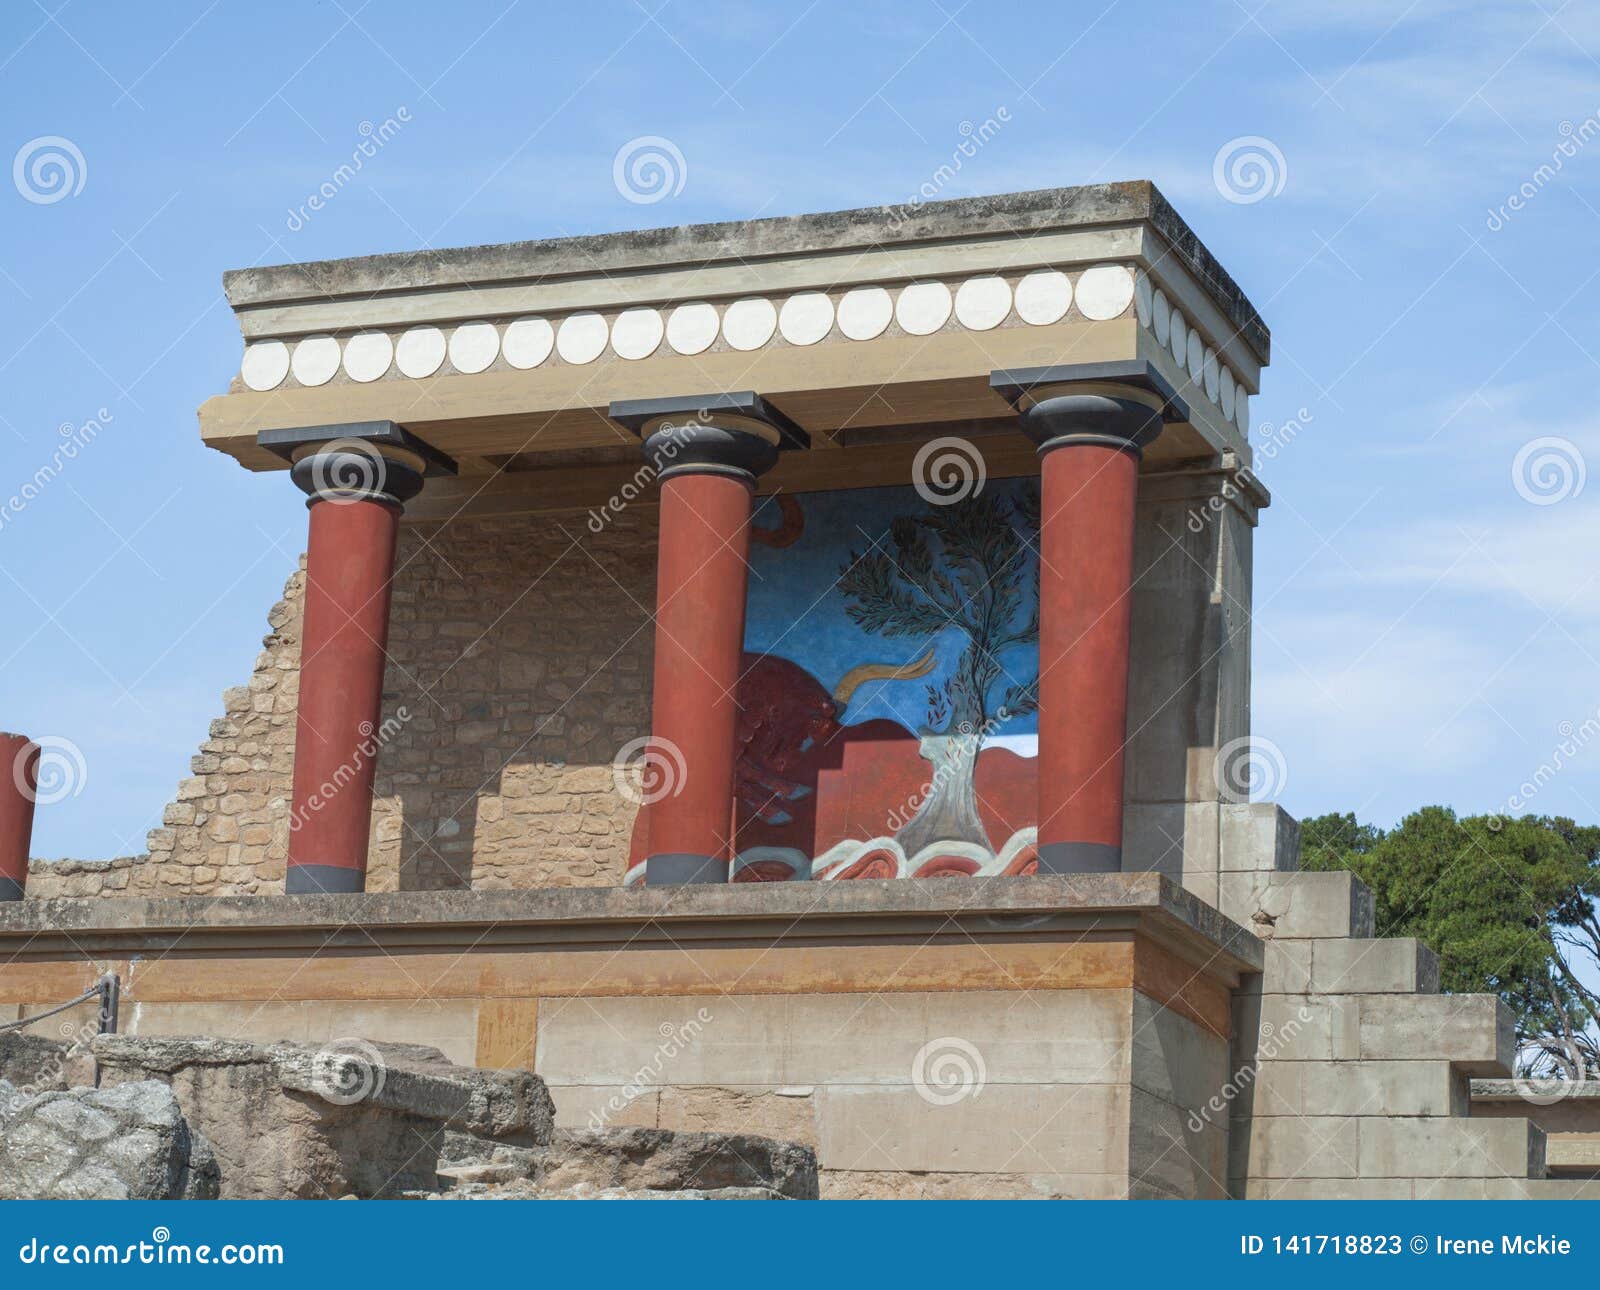 greece, crete, knossos palace dates from 1900bc, architectural and archaeological site